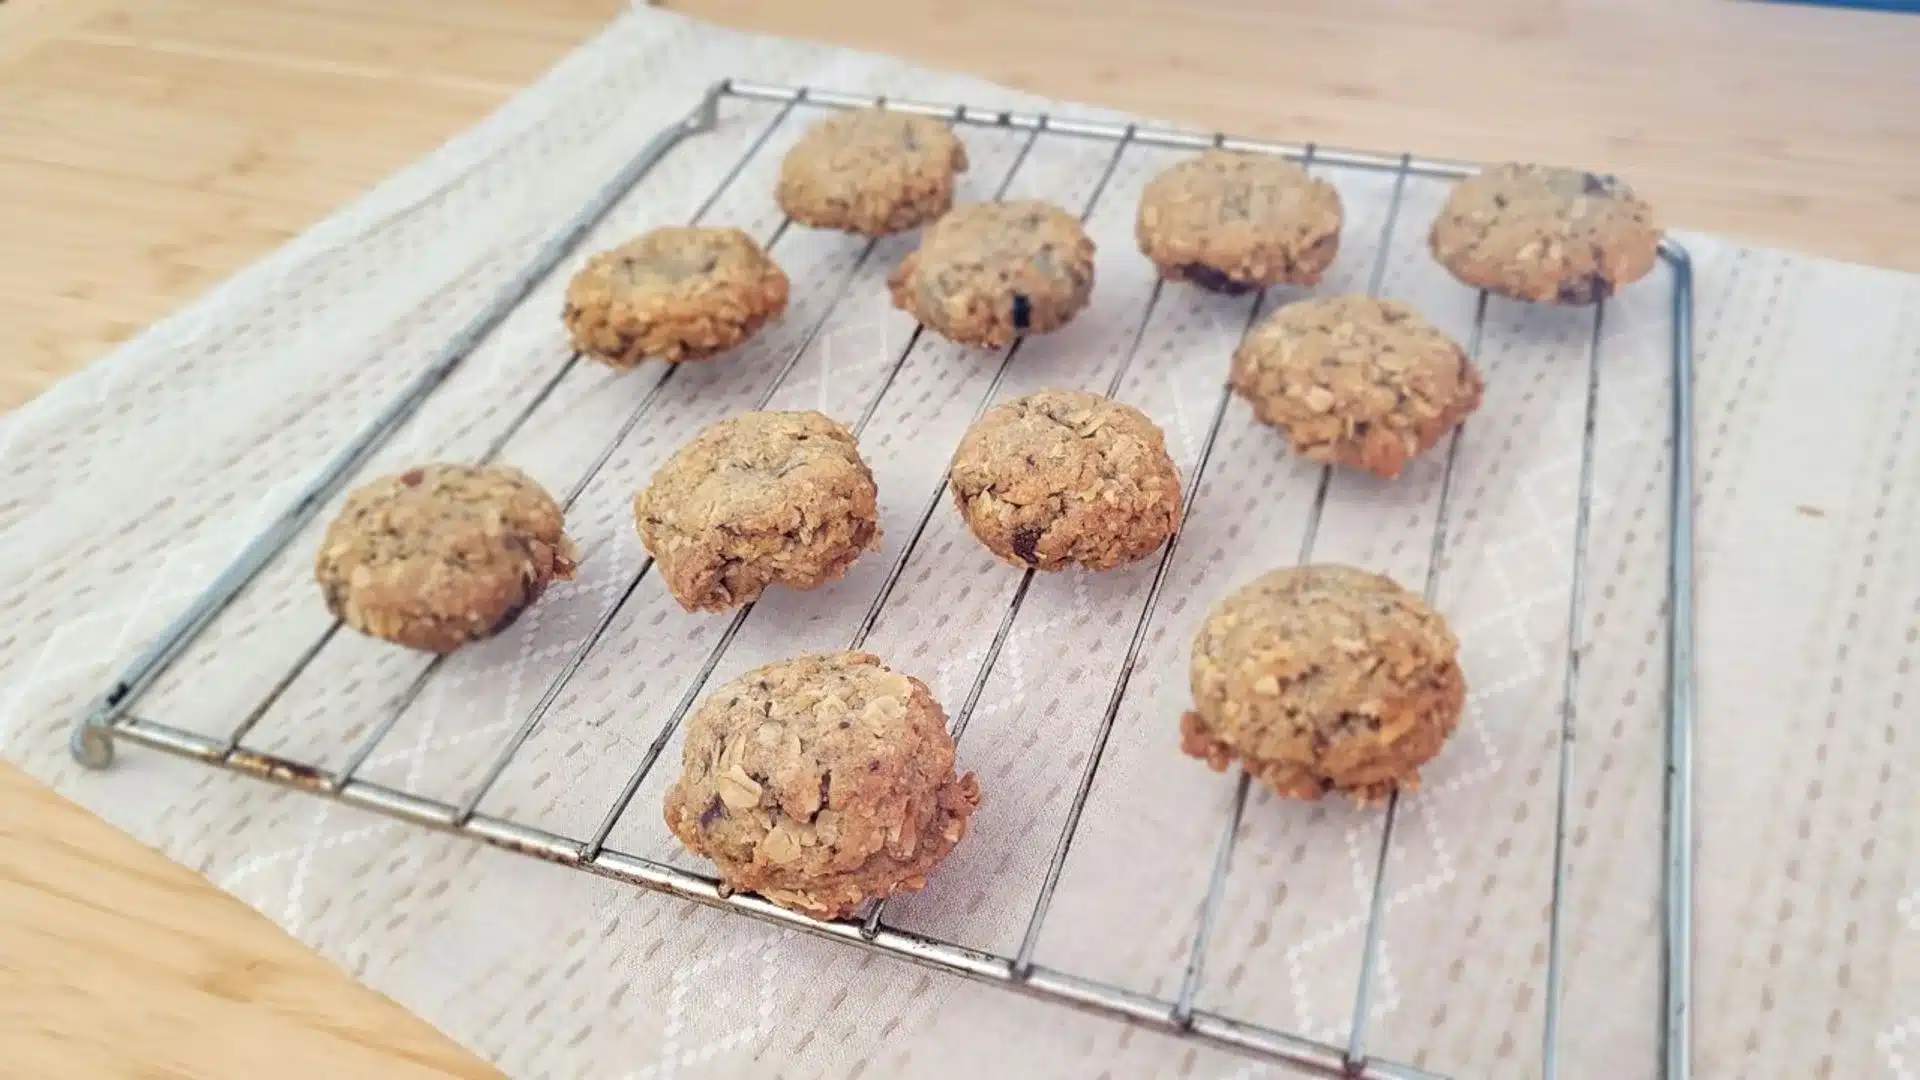 oatmeal cookies with orange zest and chocolate chips